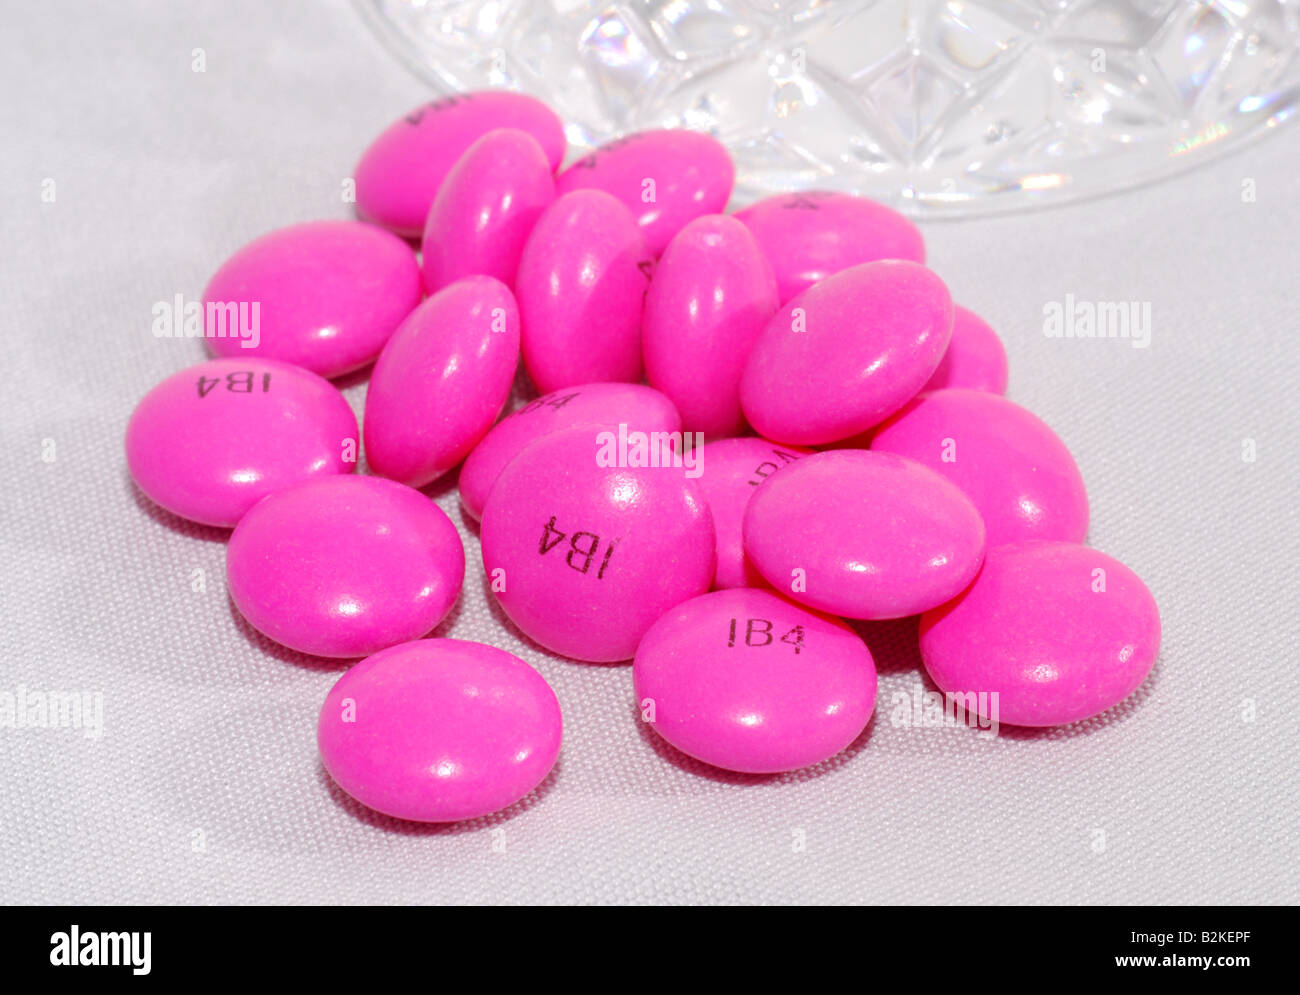 generic image of non steroidal anti inflammatory drug NSAIDs Ibuprofen used to relieve pain Stock Photo